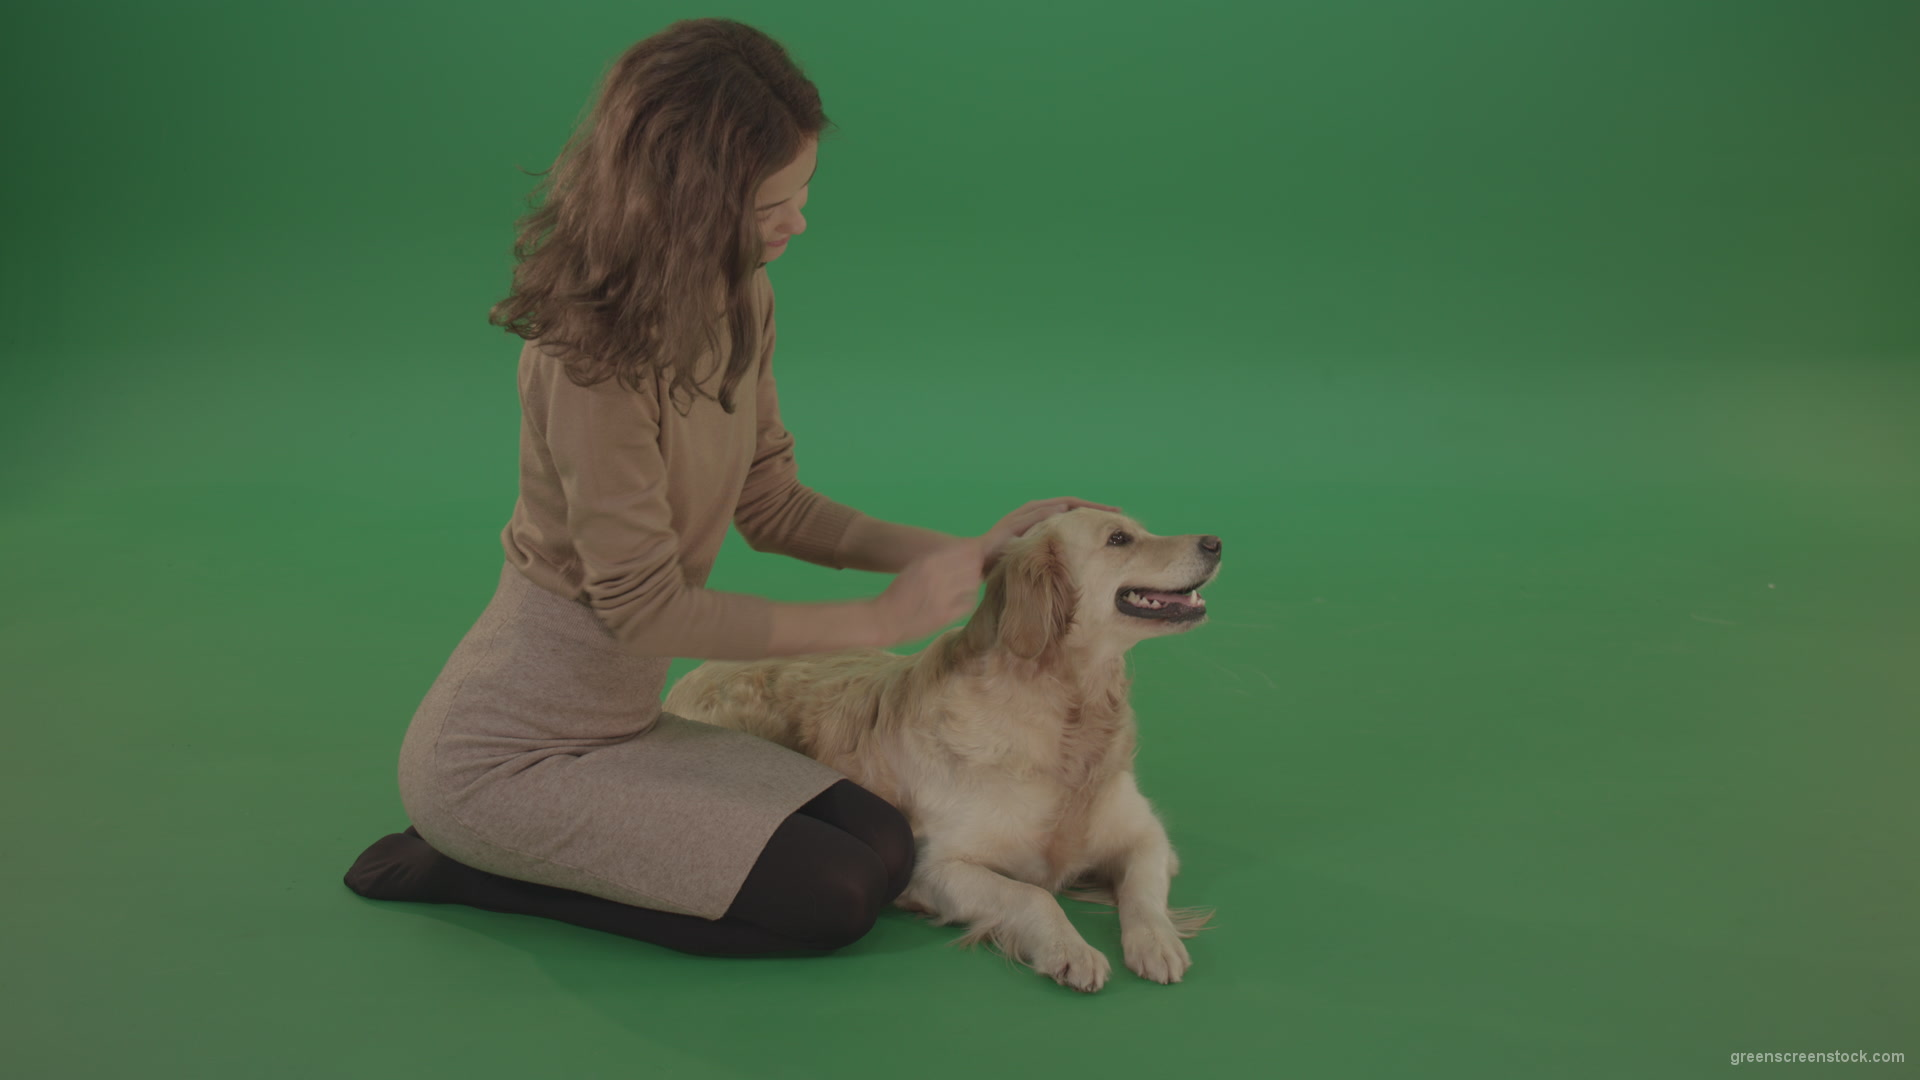 Young-Girl-stroke-the-dog-golden-retriever-big-puppy-isolated-on-green-screen-background_005 Green Screen Stock